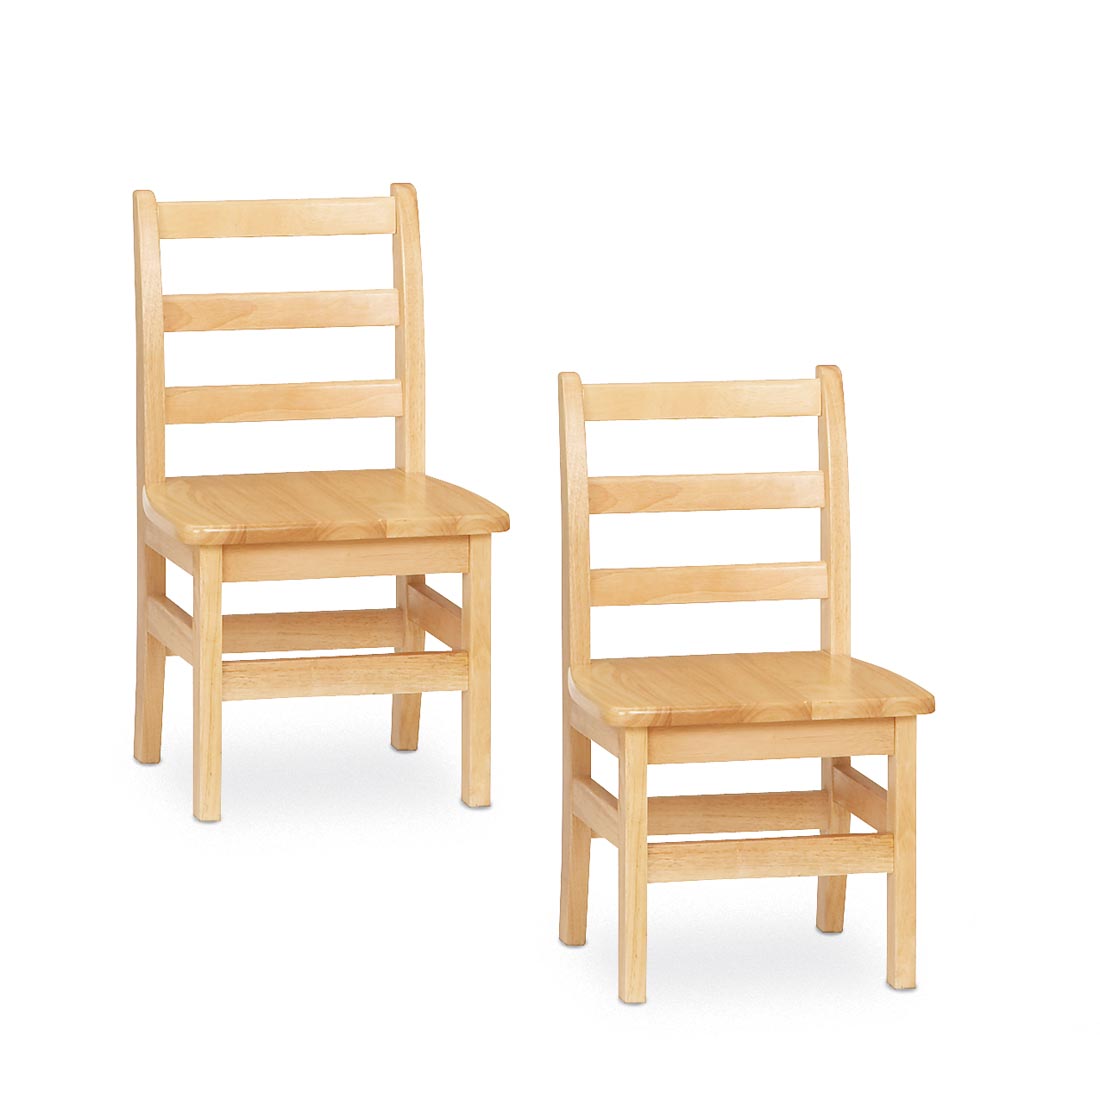 Two Ladderback Chairs